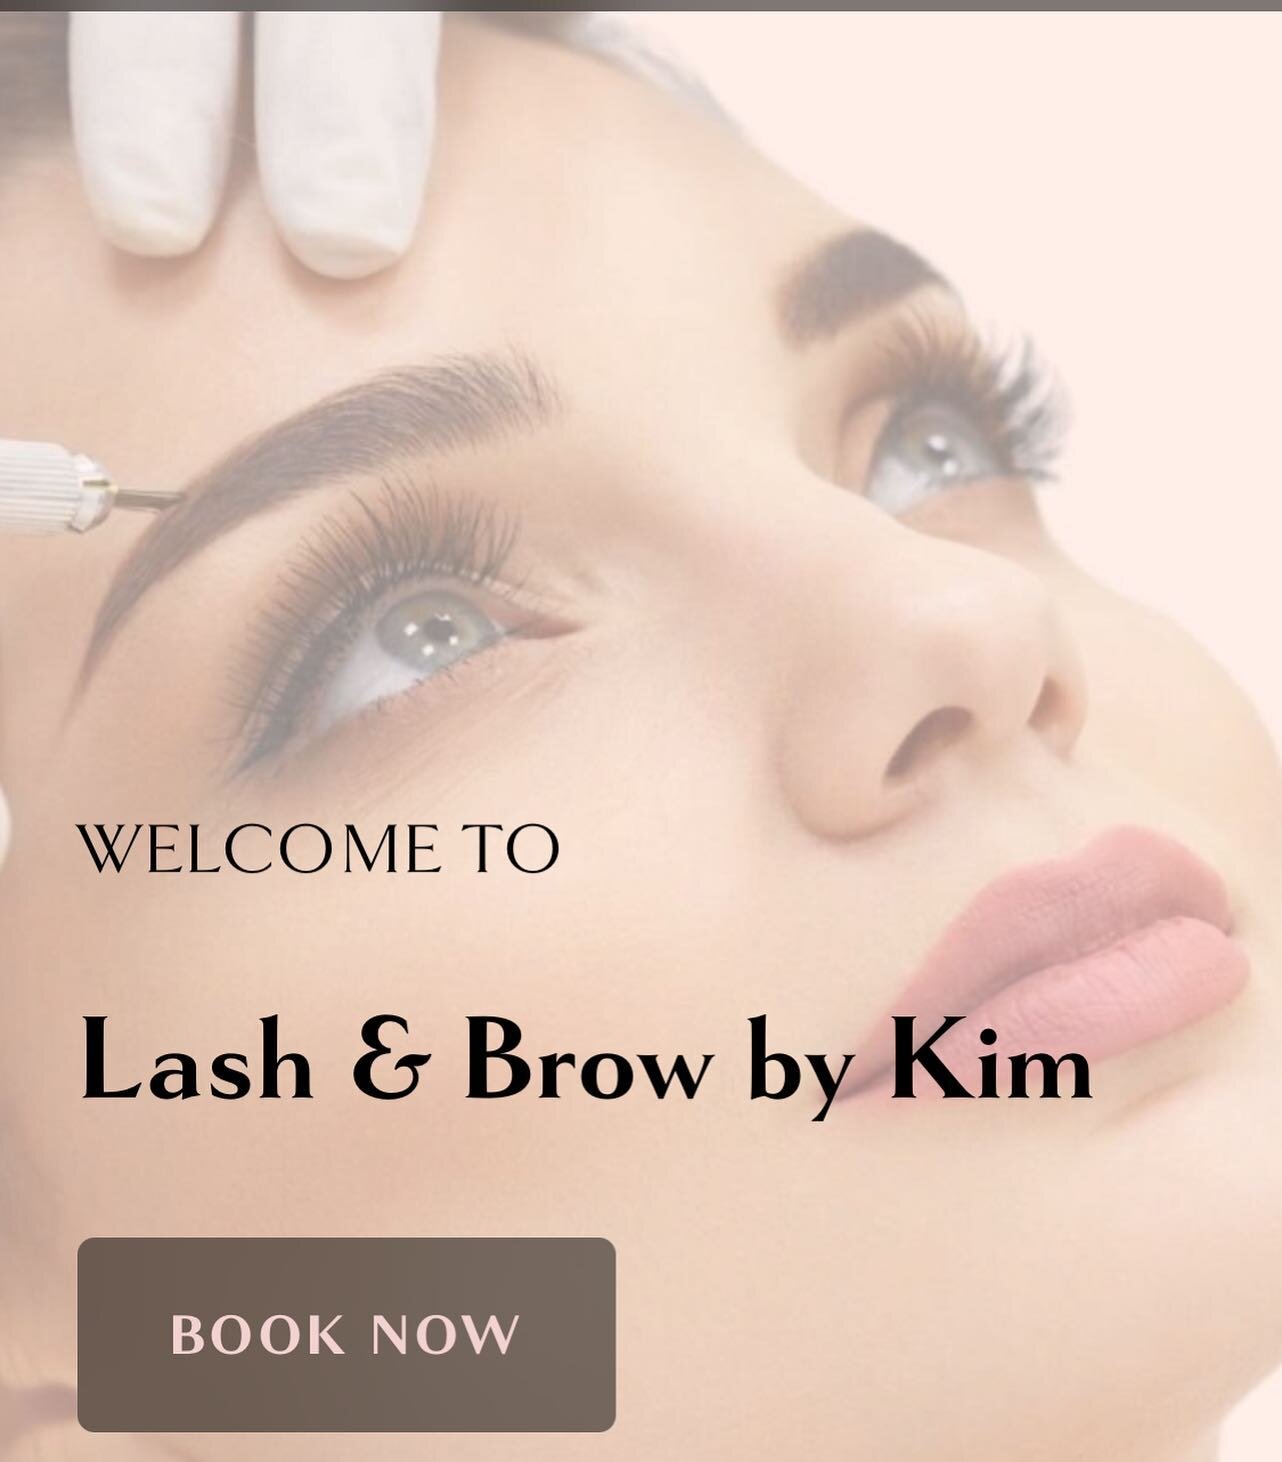 🔥🔥🔥Www.lashandbrowbykim.com
🤗Website is up and running 
Omg i am so happy with my new website.
Thanks so much @isimplydesign for exactly what I wanted &hearts;️&hearts;️&hearts;️
Thanks @seattle3dbrows.noi  for recommending such a professional an